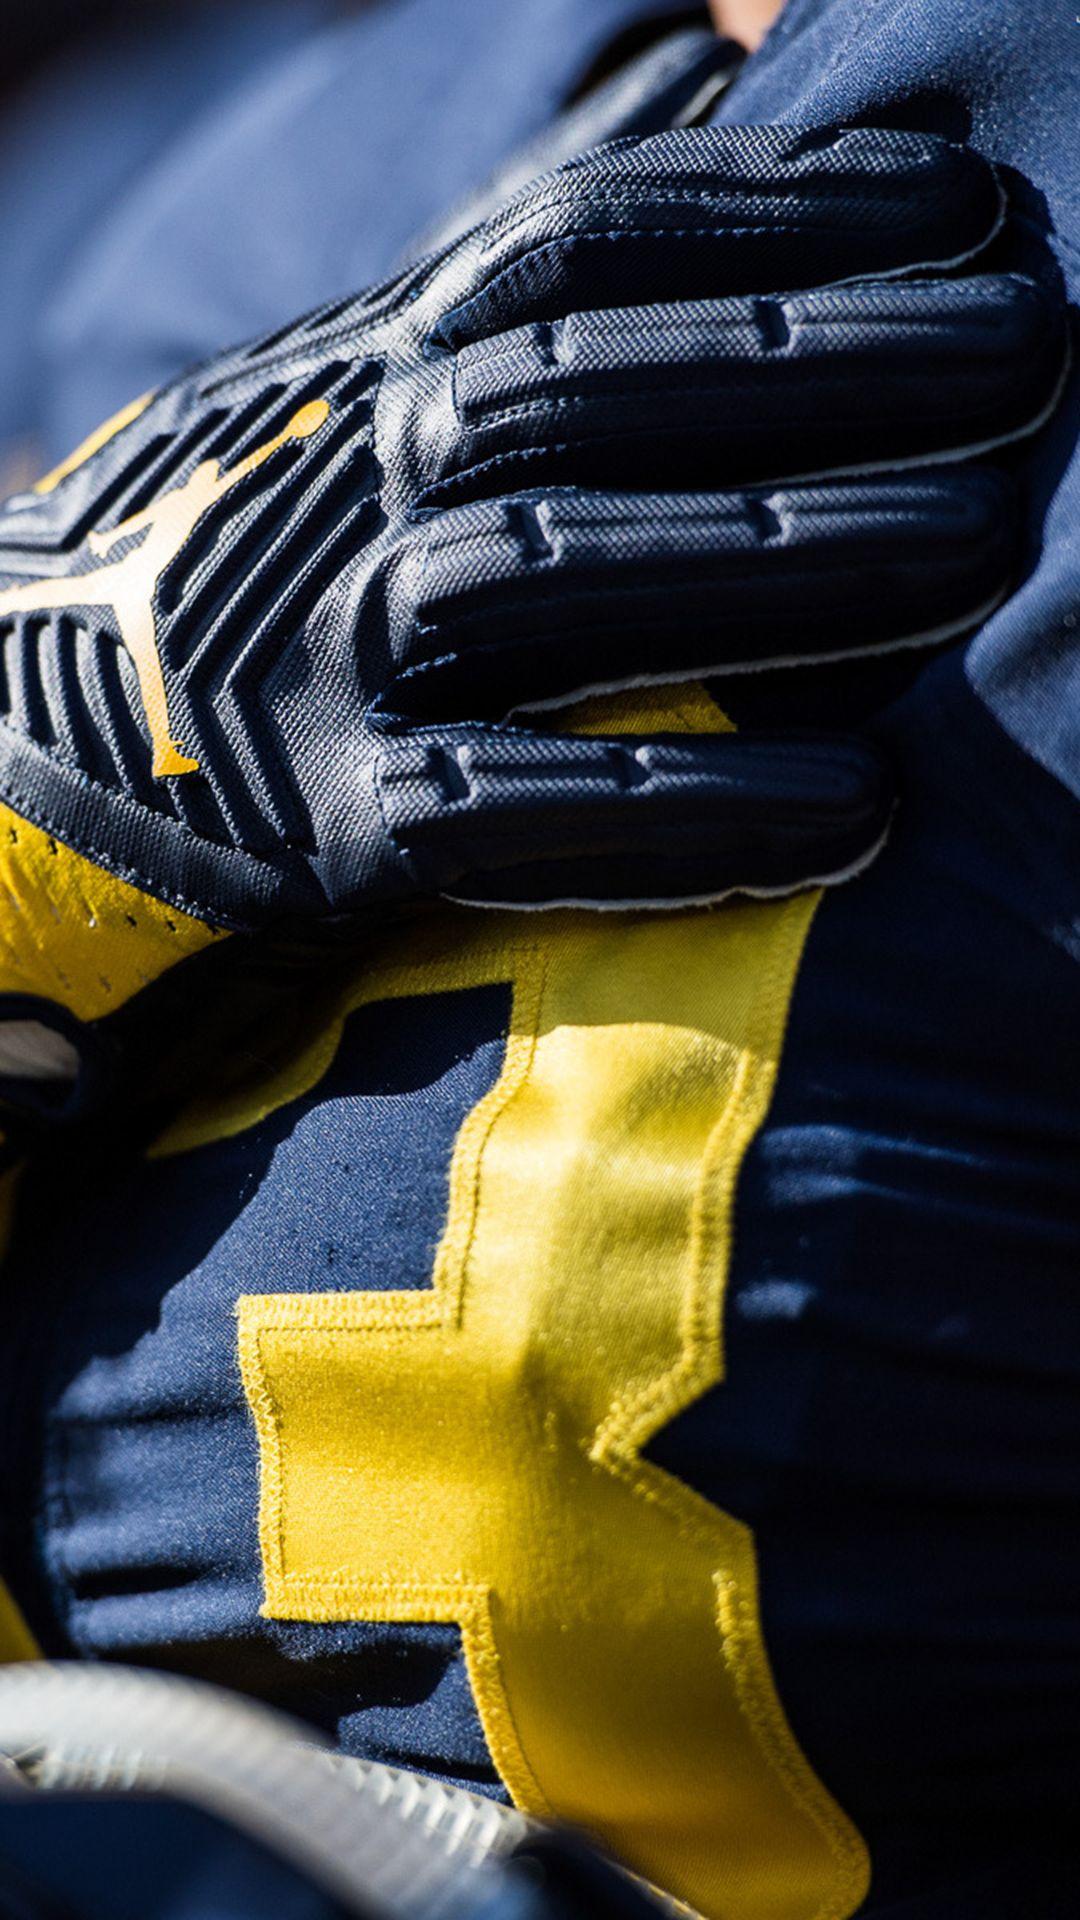 University of Michigan Official Athletic Site